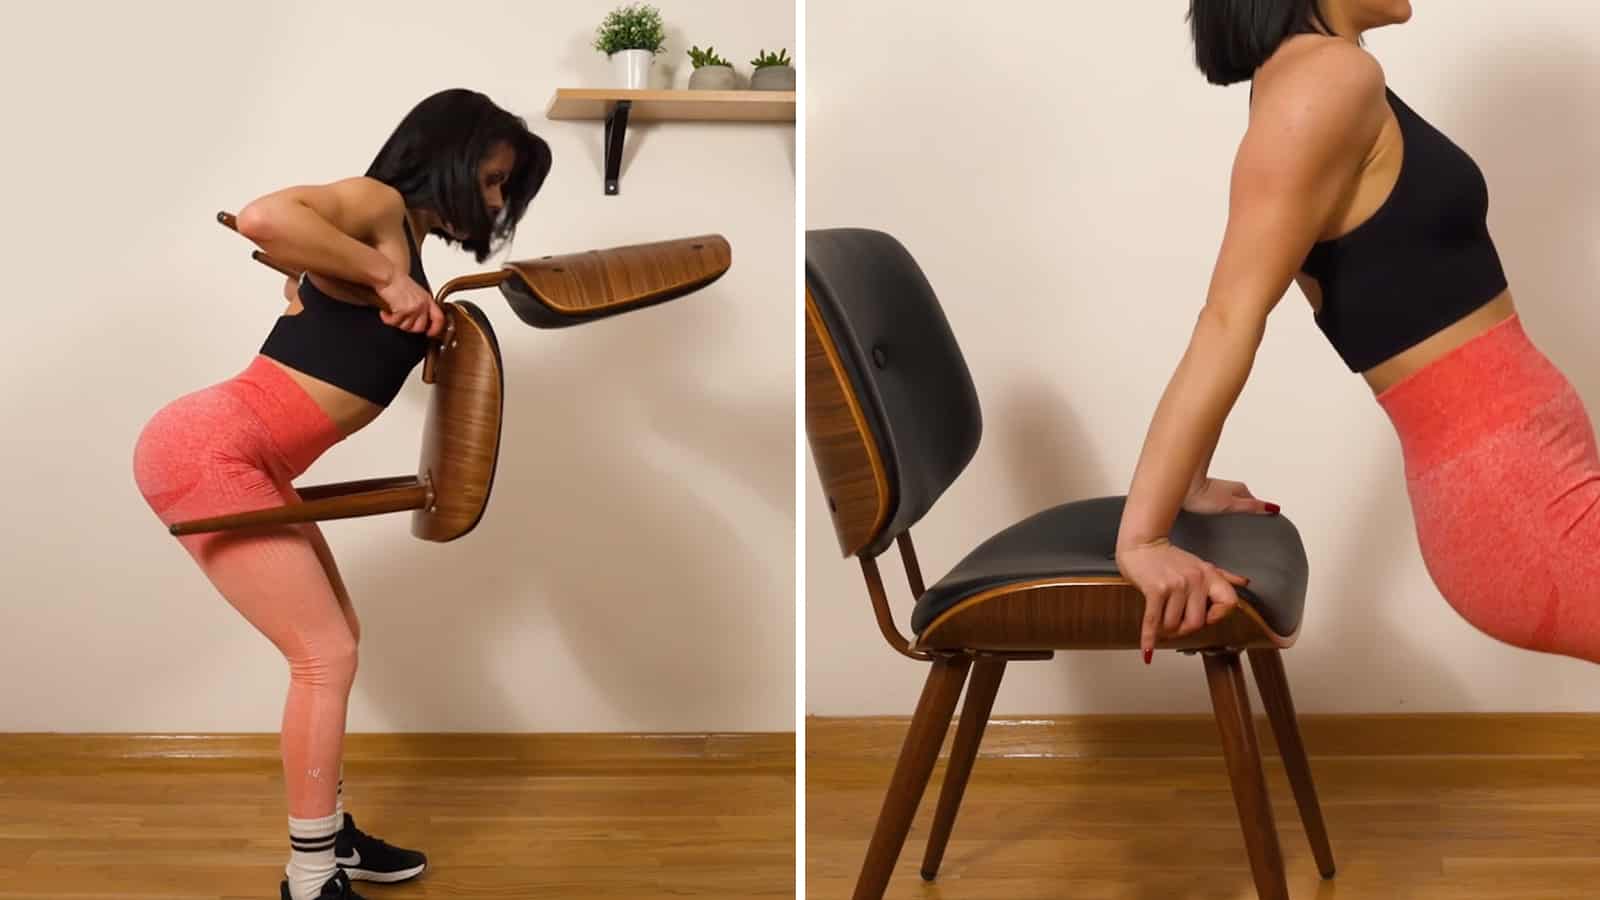 15 Best Chair Exercises to Burn Fat at Home